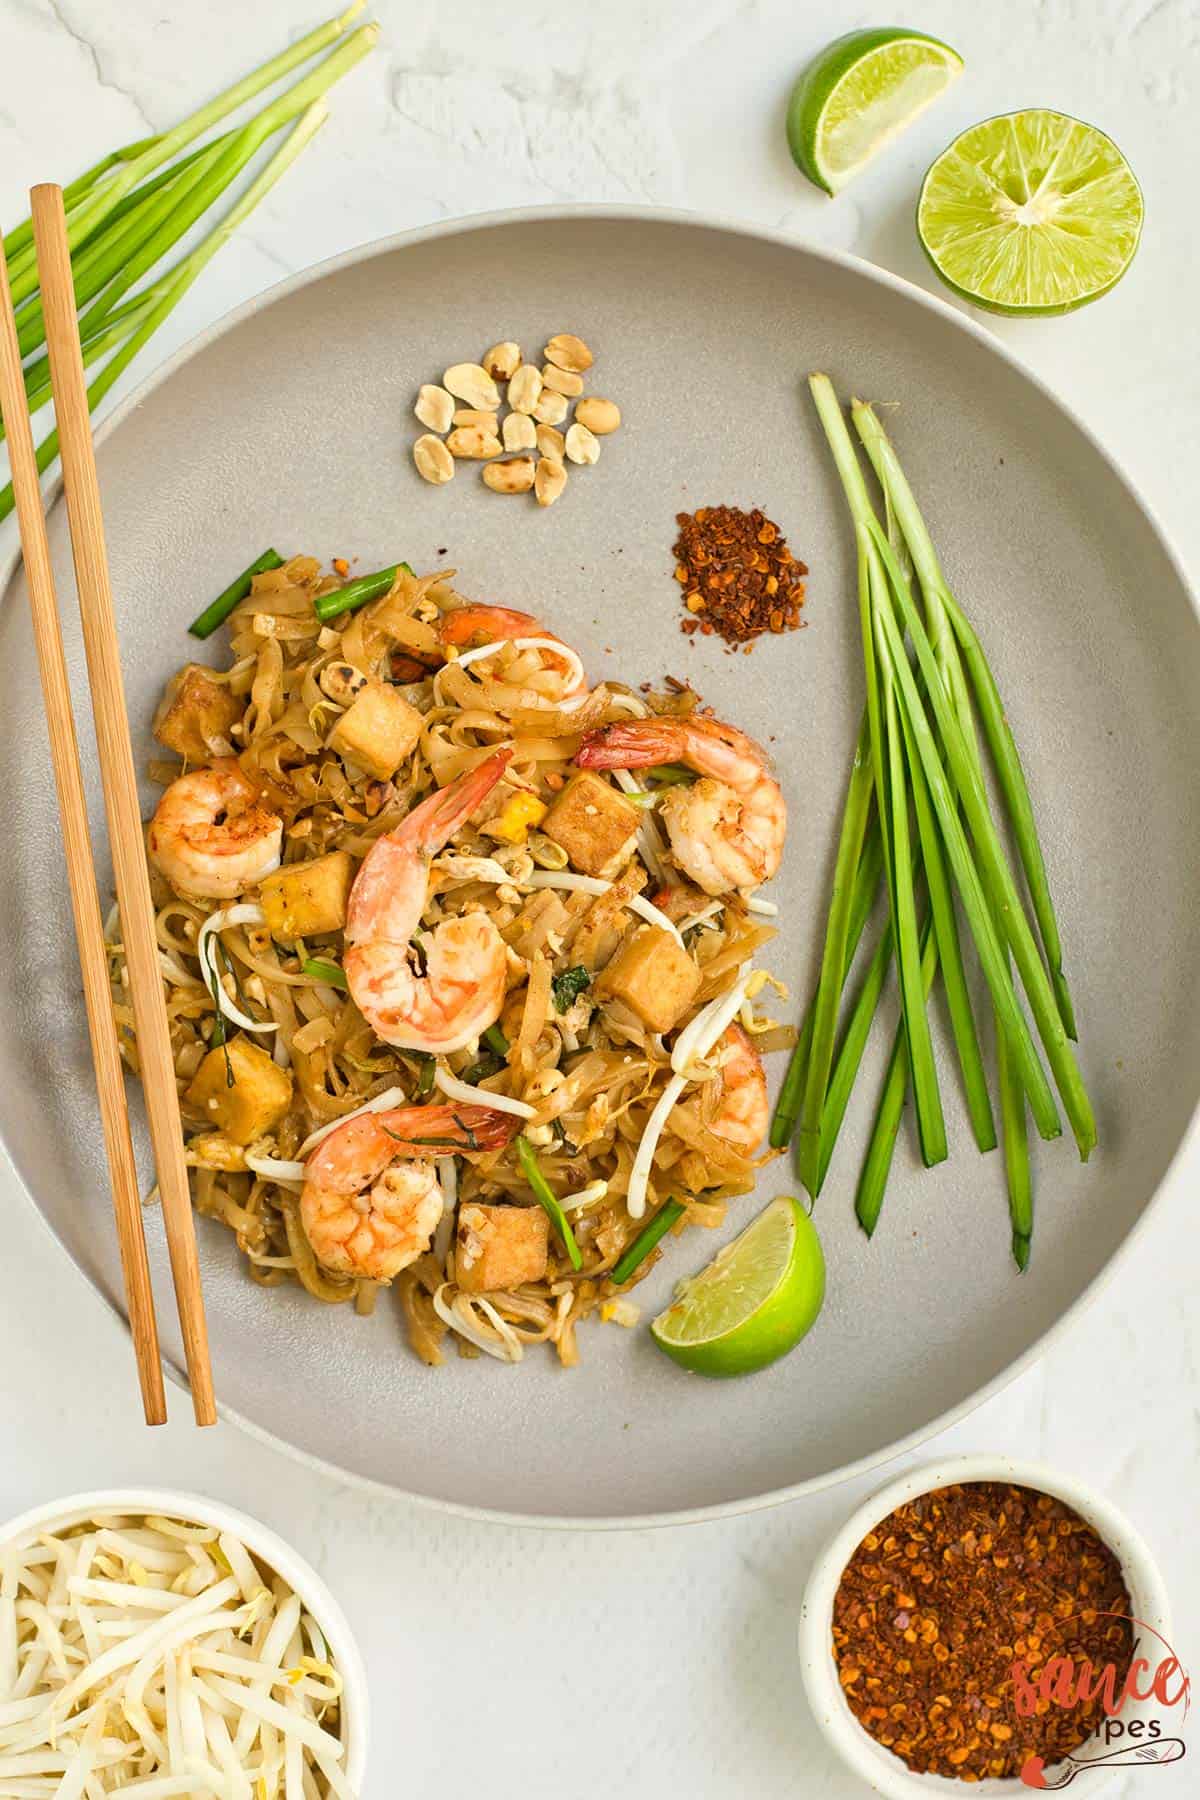 a garnished dinner plate full of completed pad thai, green onions, lime, chili, and peanuts